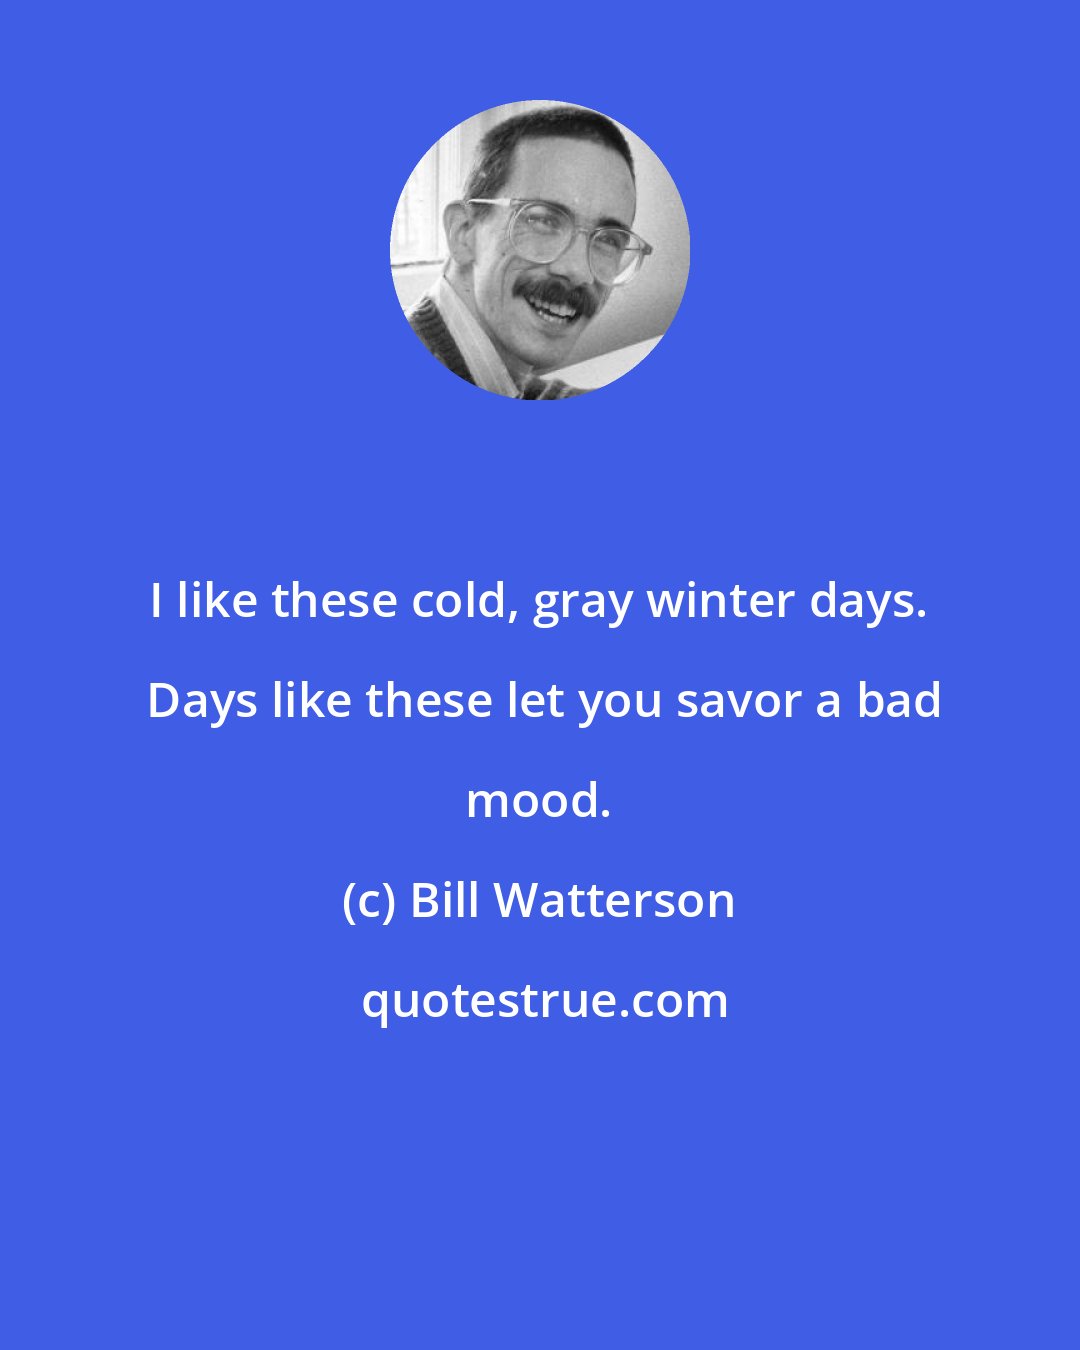 Bill Watterson: I like these cold, gray winter days.  Days like these let you savor a bad mood.